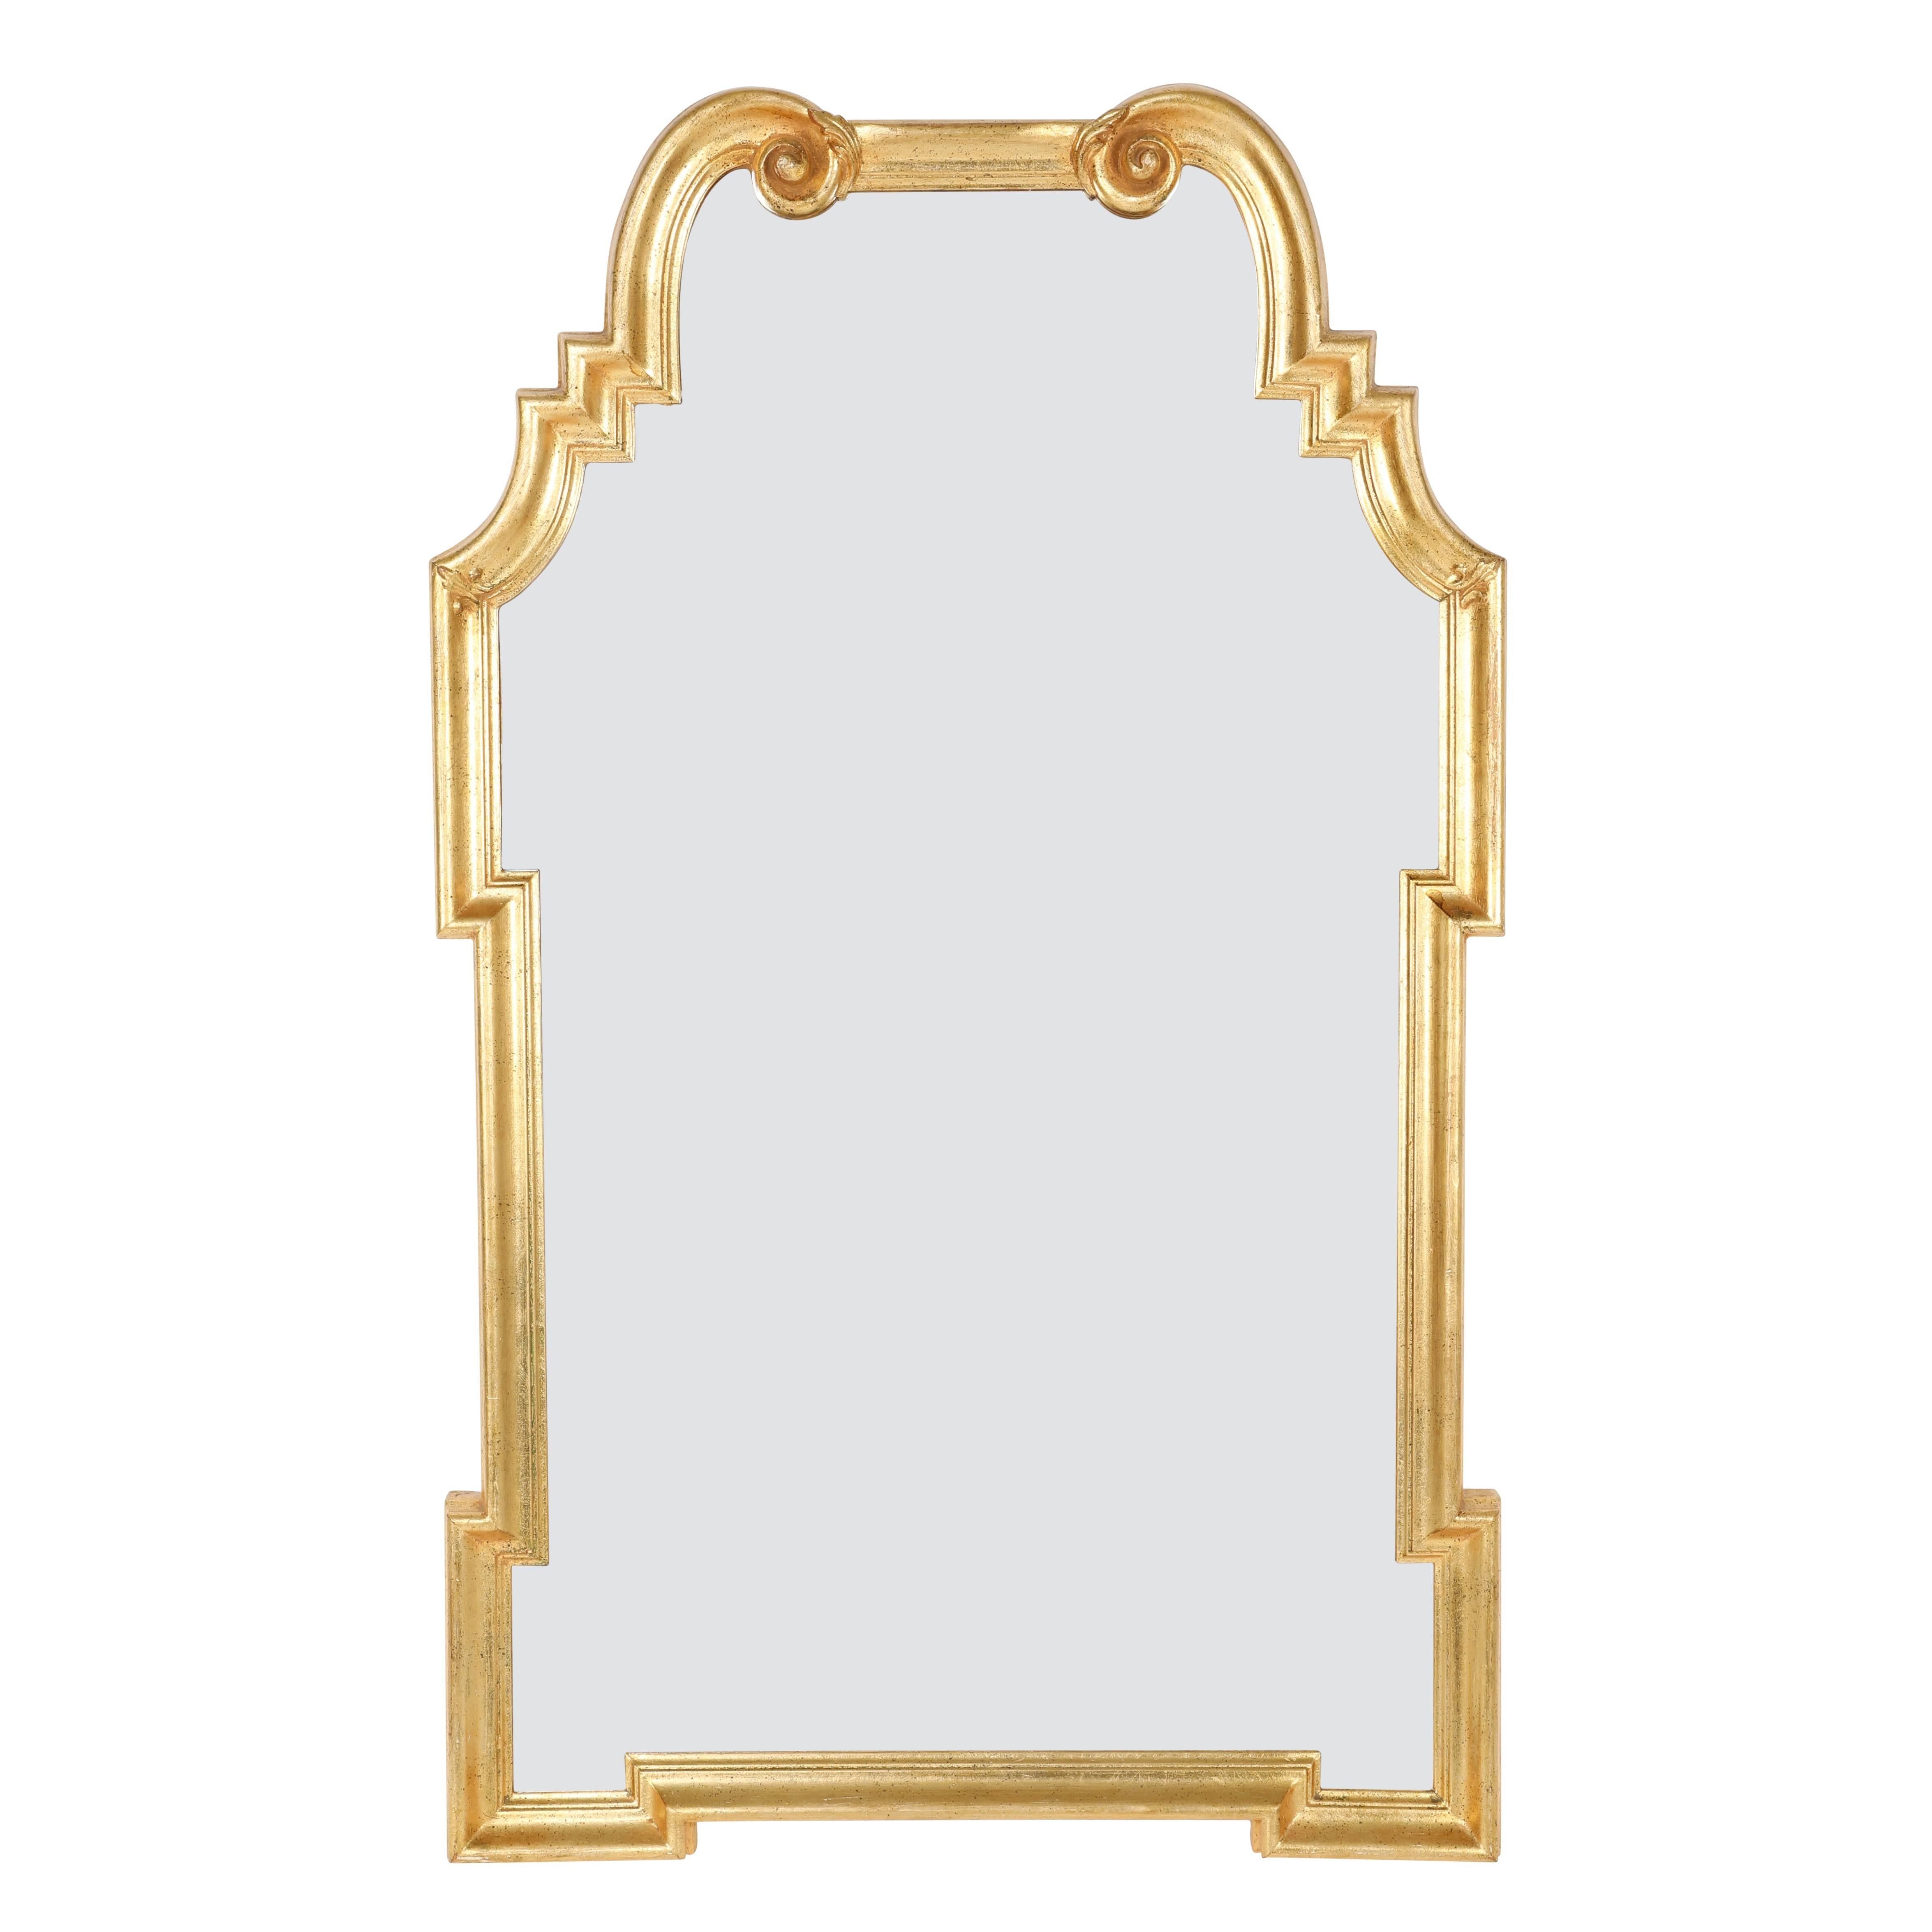 Fanciful 1960s Labarge wooden mirror with a gilt finish. Geometric sides lead to a scrolled top, giving this mirror transitional appeal. Unmarked. 

See this item in our Brooklyn showroom, 61 Greenpoint Ave., Suite 312, Brooklyn, 11 a.m. to 5 p.m.